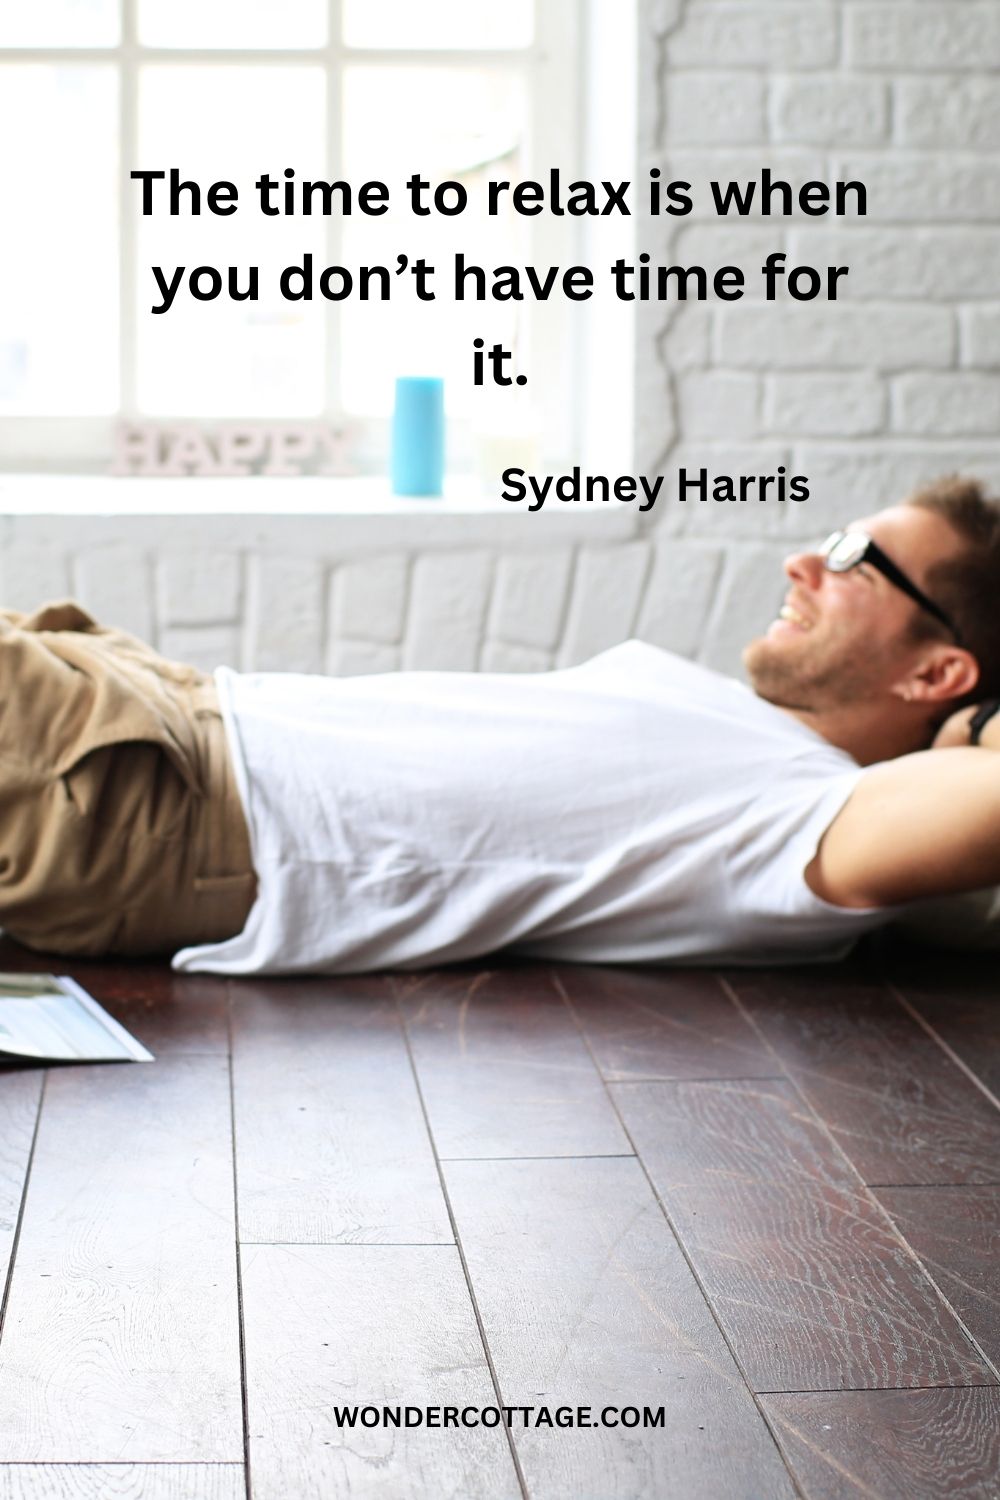 The time to relax is when you don’t have time for it. Sydney Harris